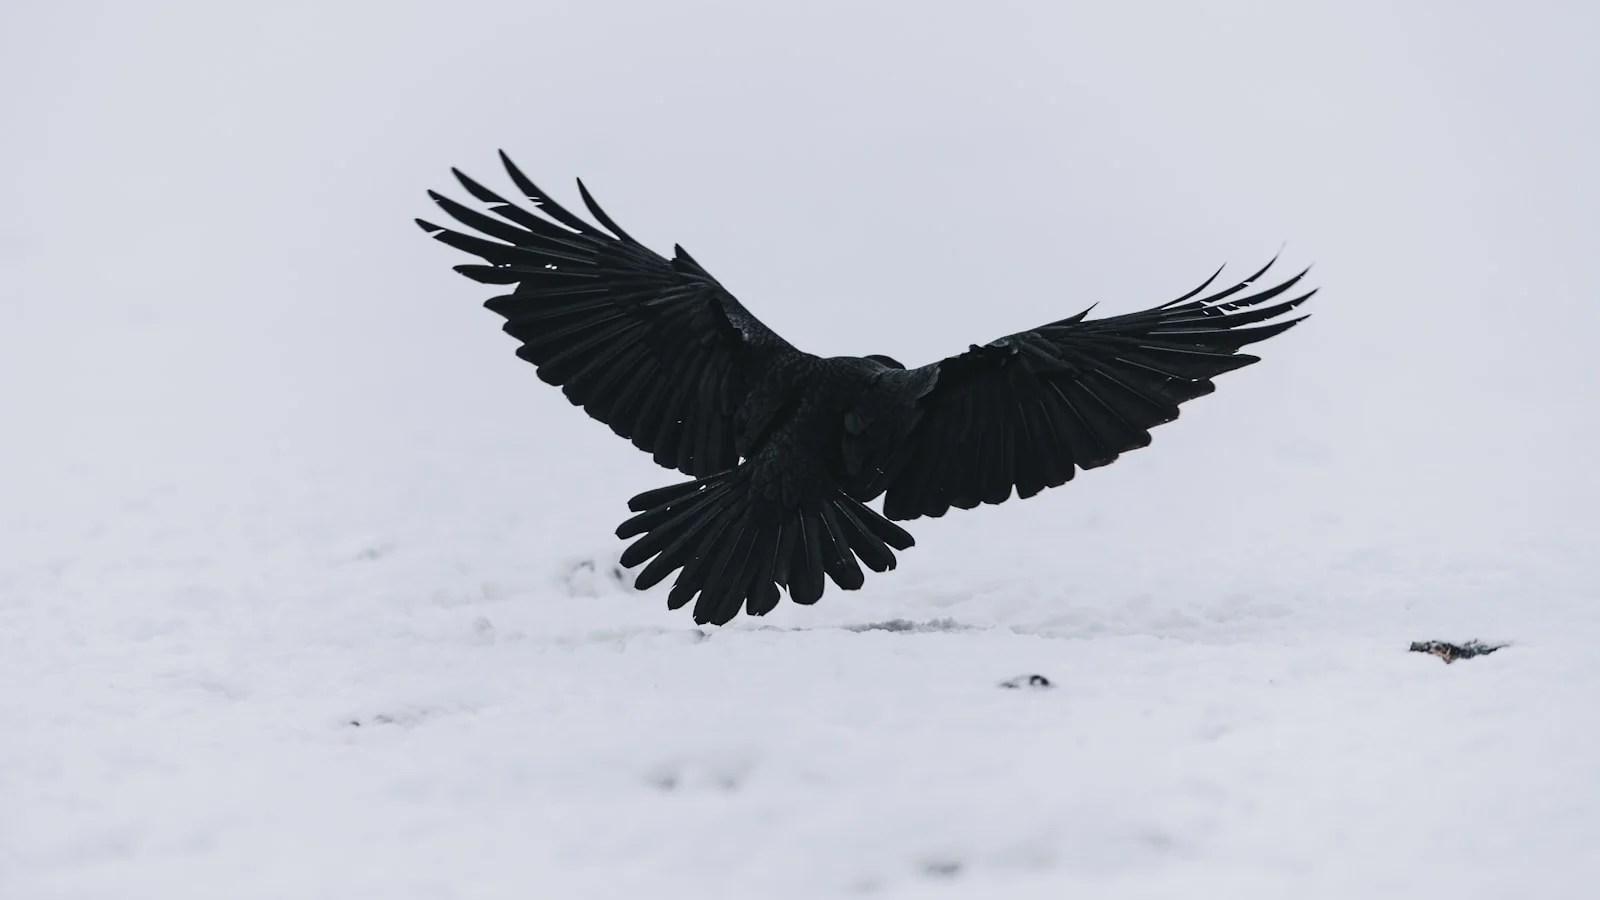 what do crows symbolize in the bible?